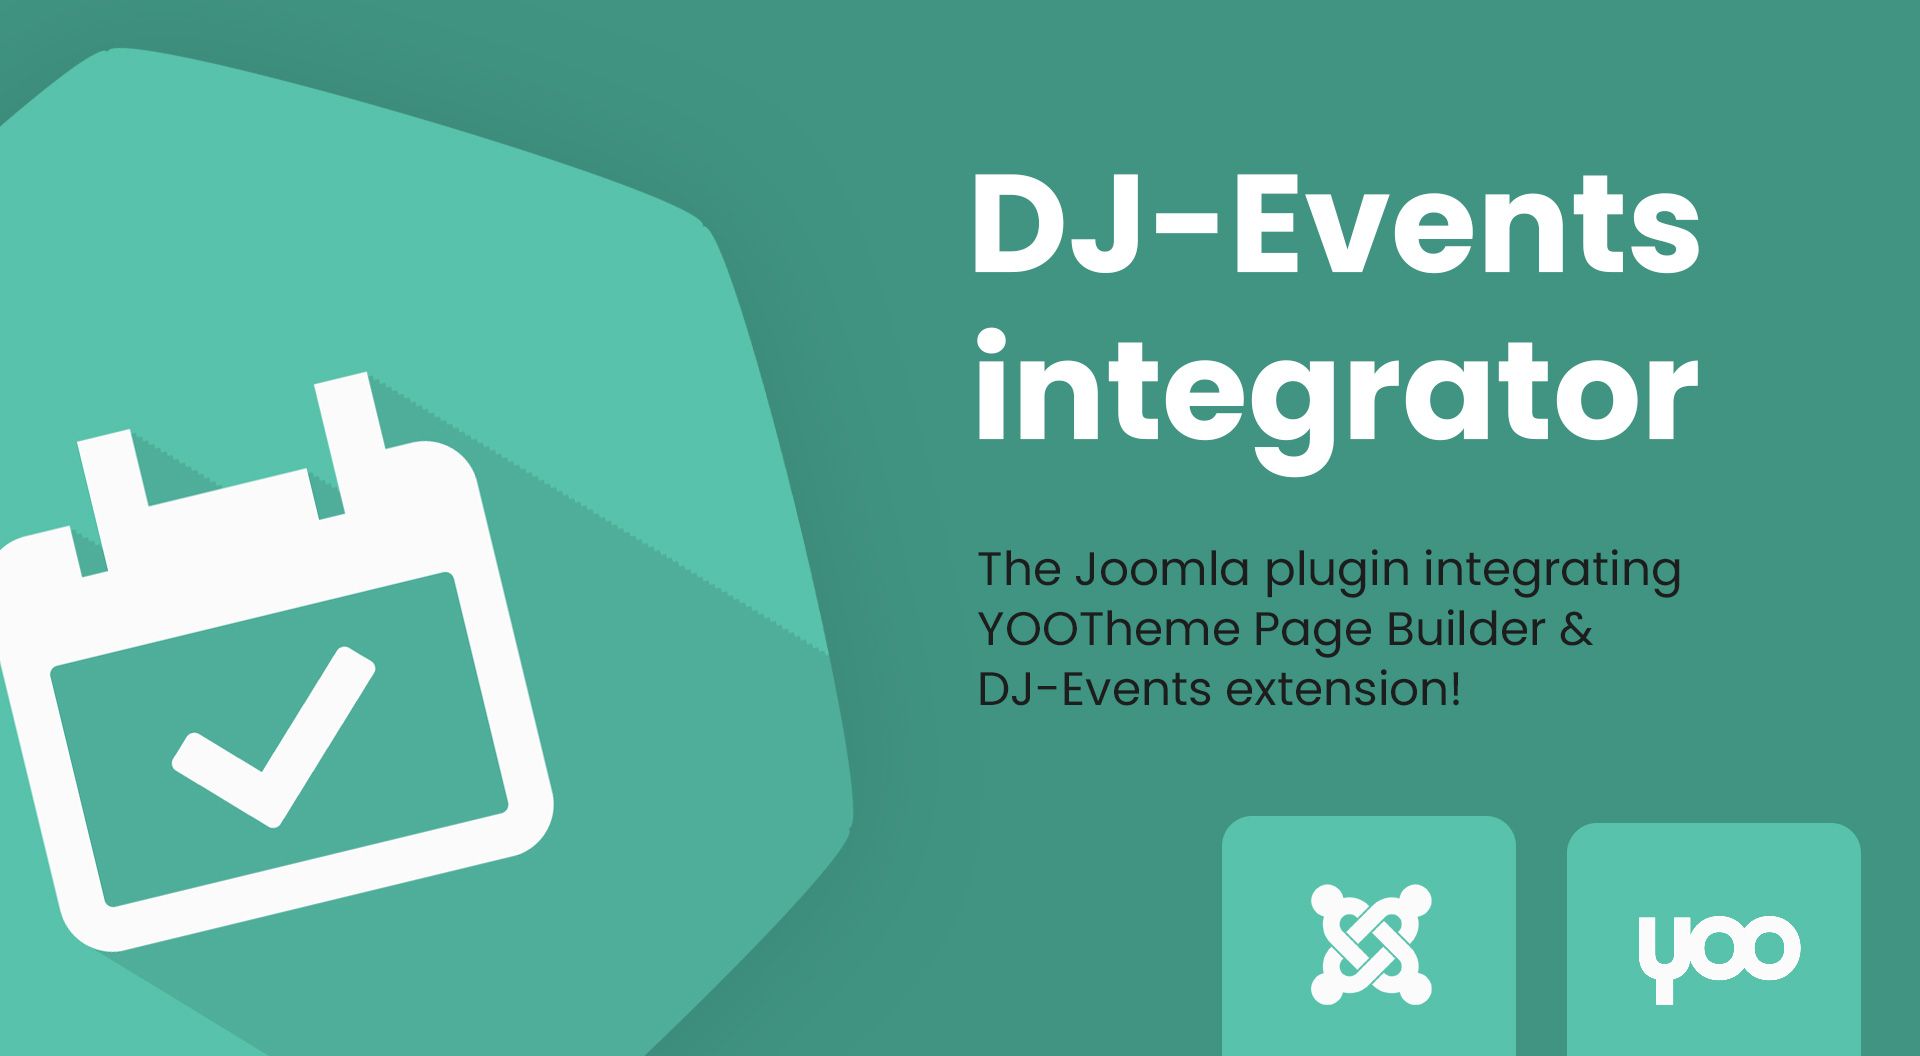 DJ-Events integrator is a new Joomla plugin integrating YOOtheme web builder with the DJ-Events!